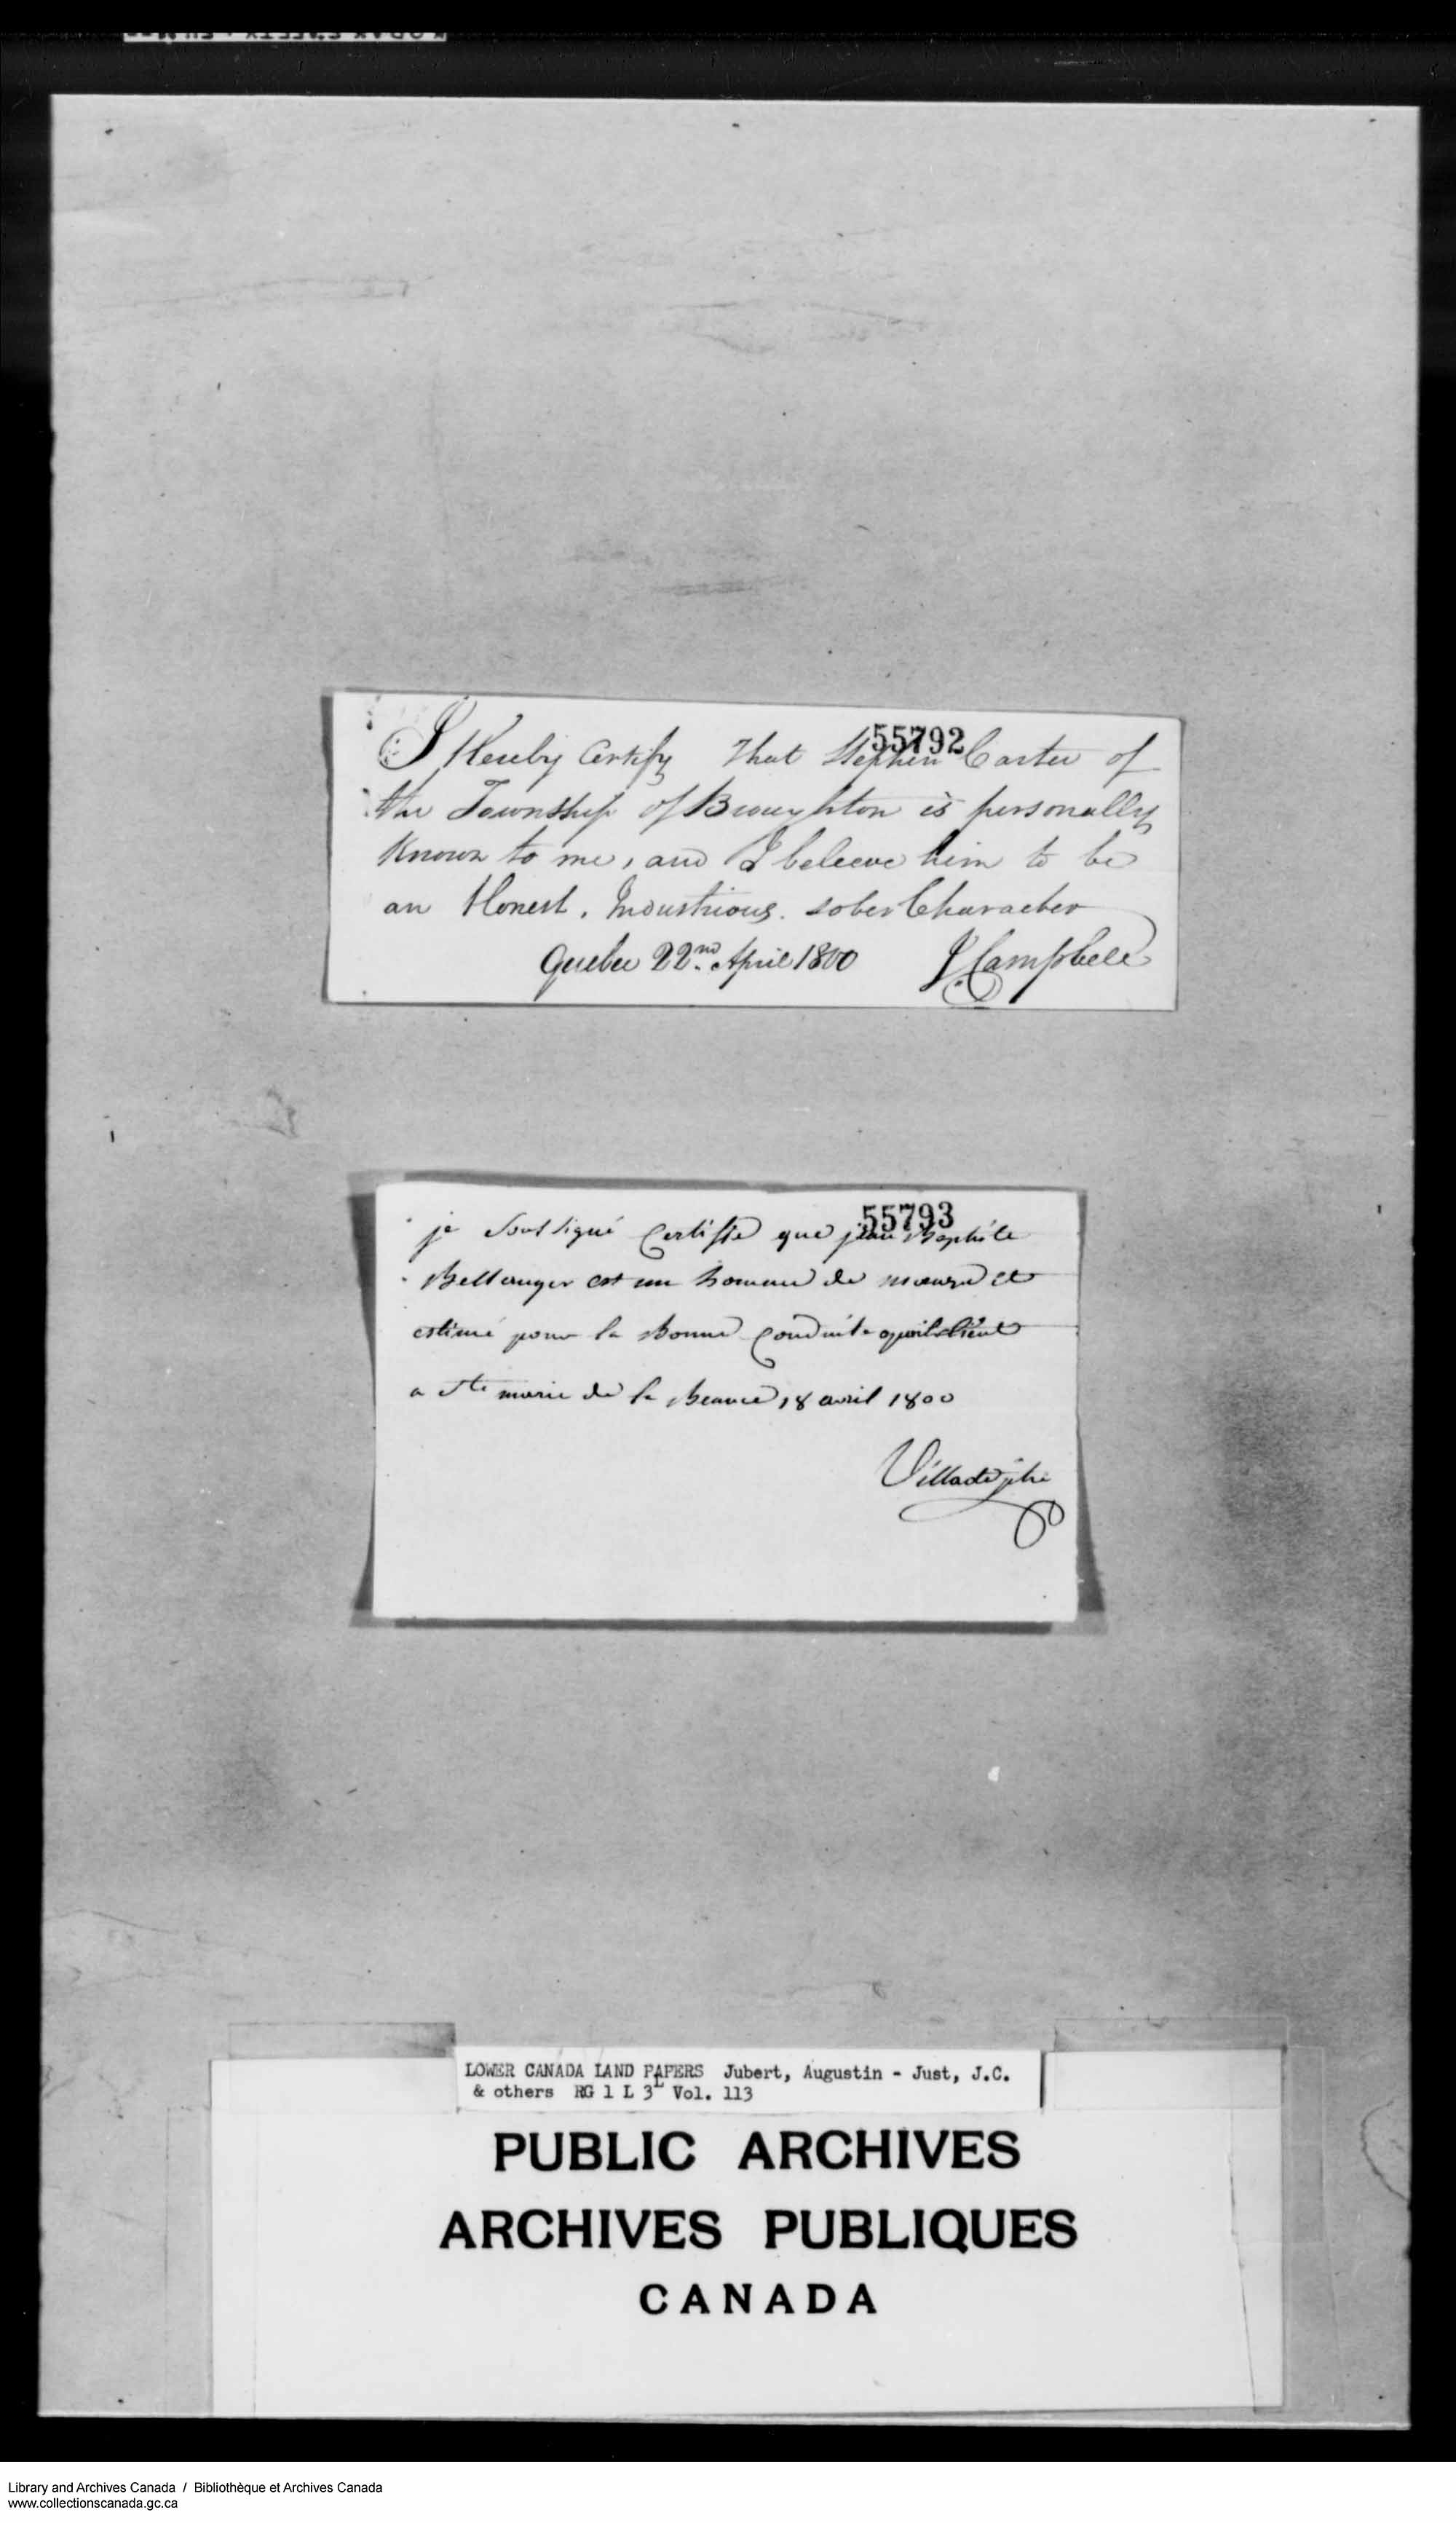 Digitized page of  for Image No.: e008700280